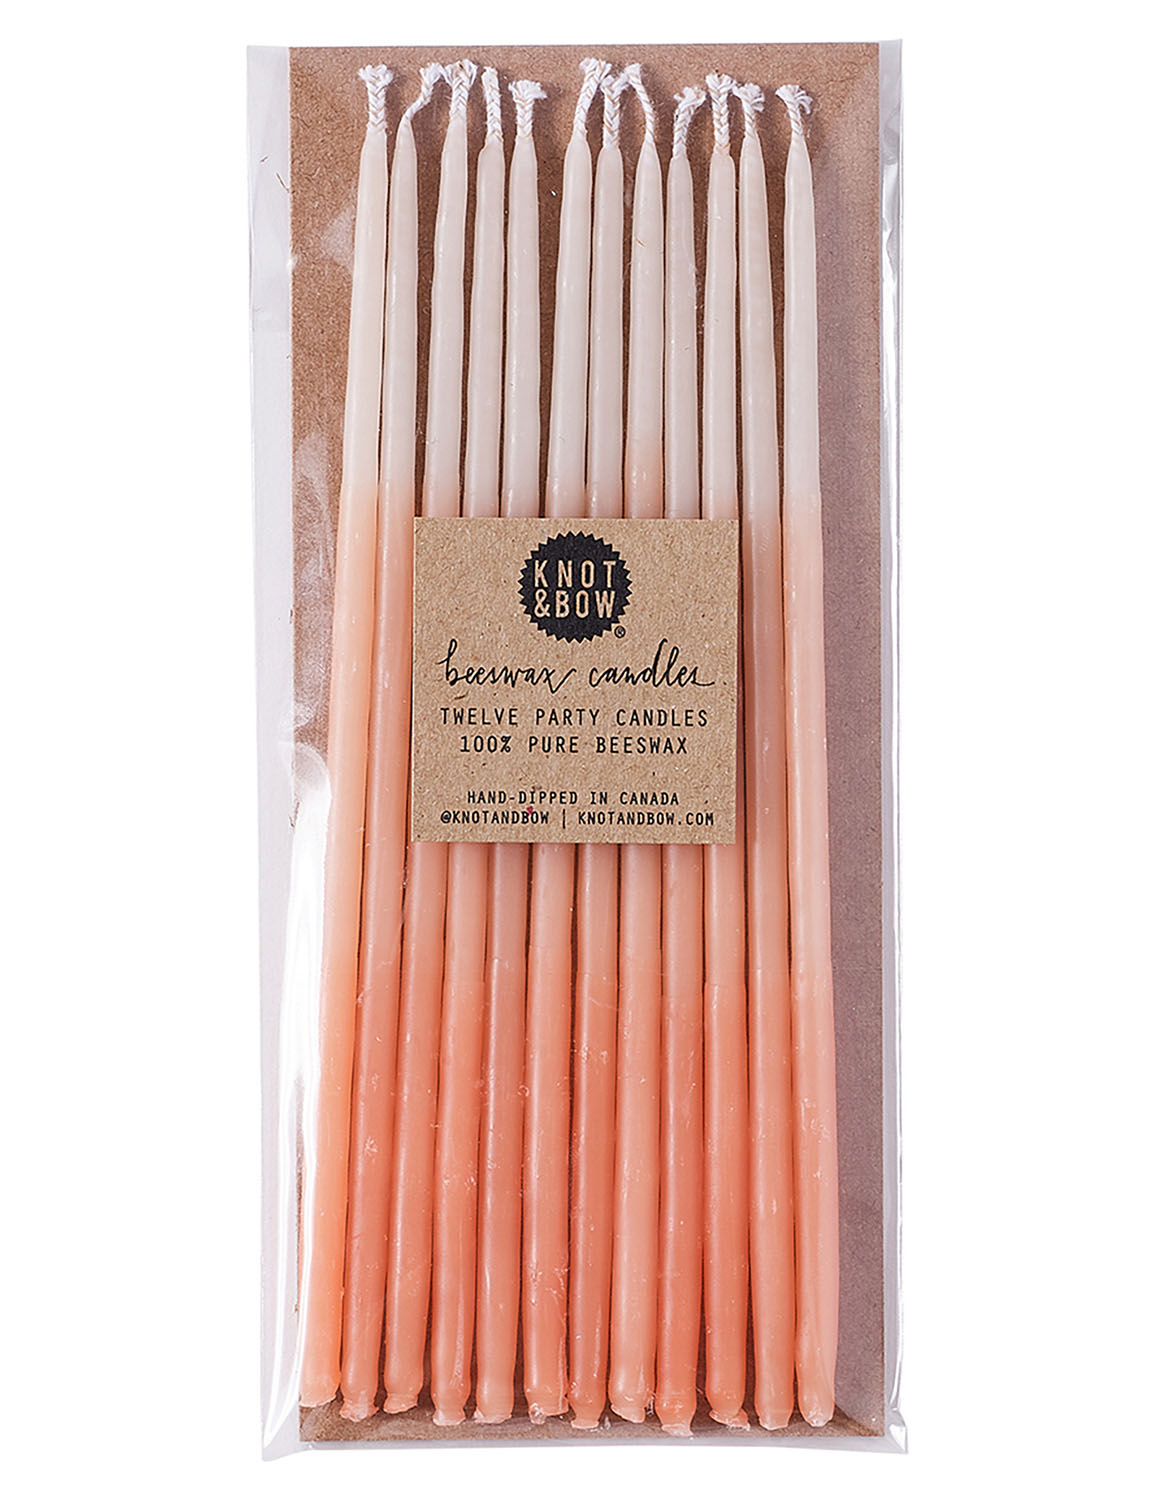 Ombré Tall Beeswax Party Candles 
															/ Knot & Bow							